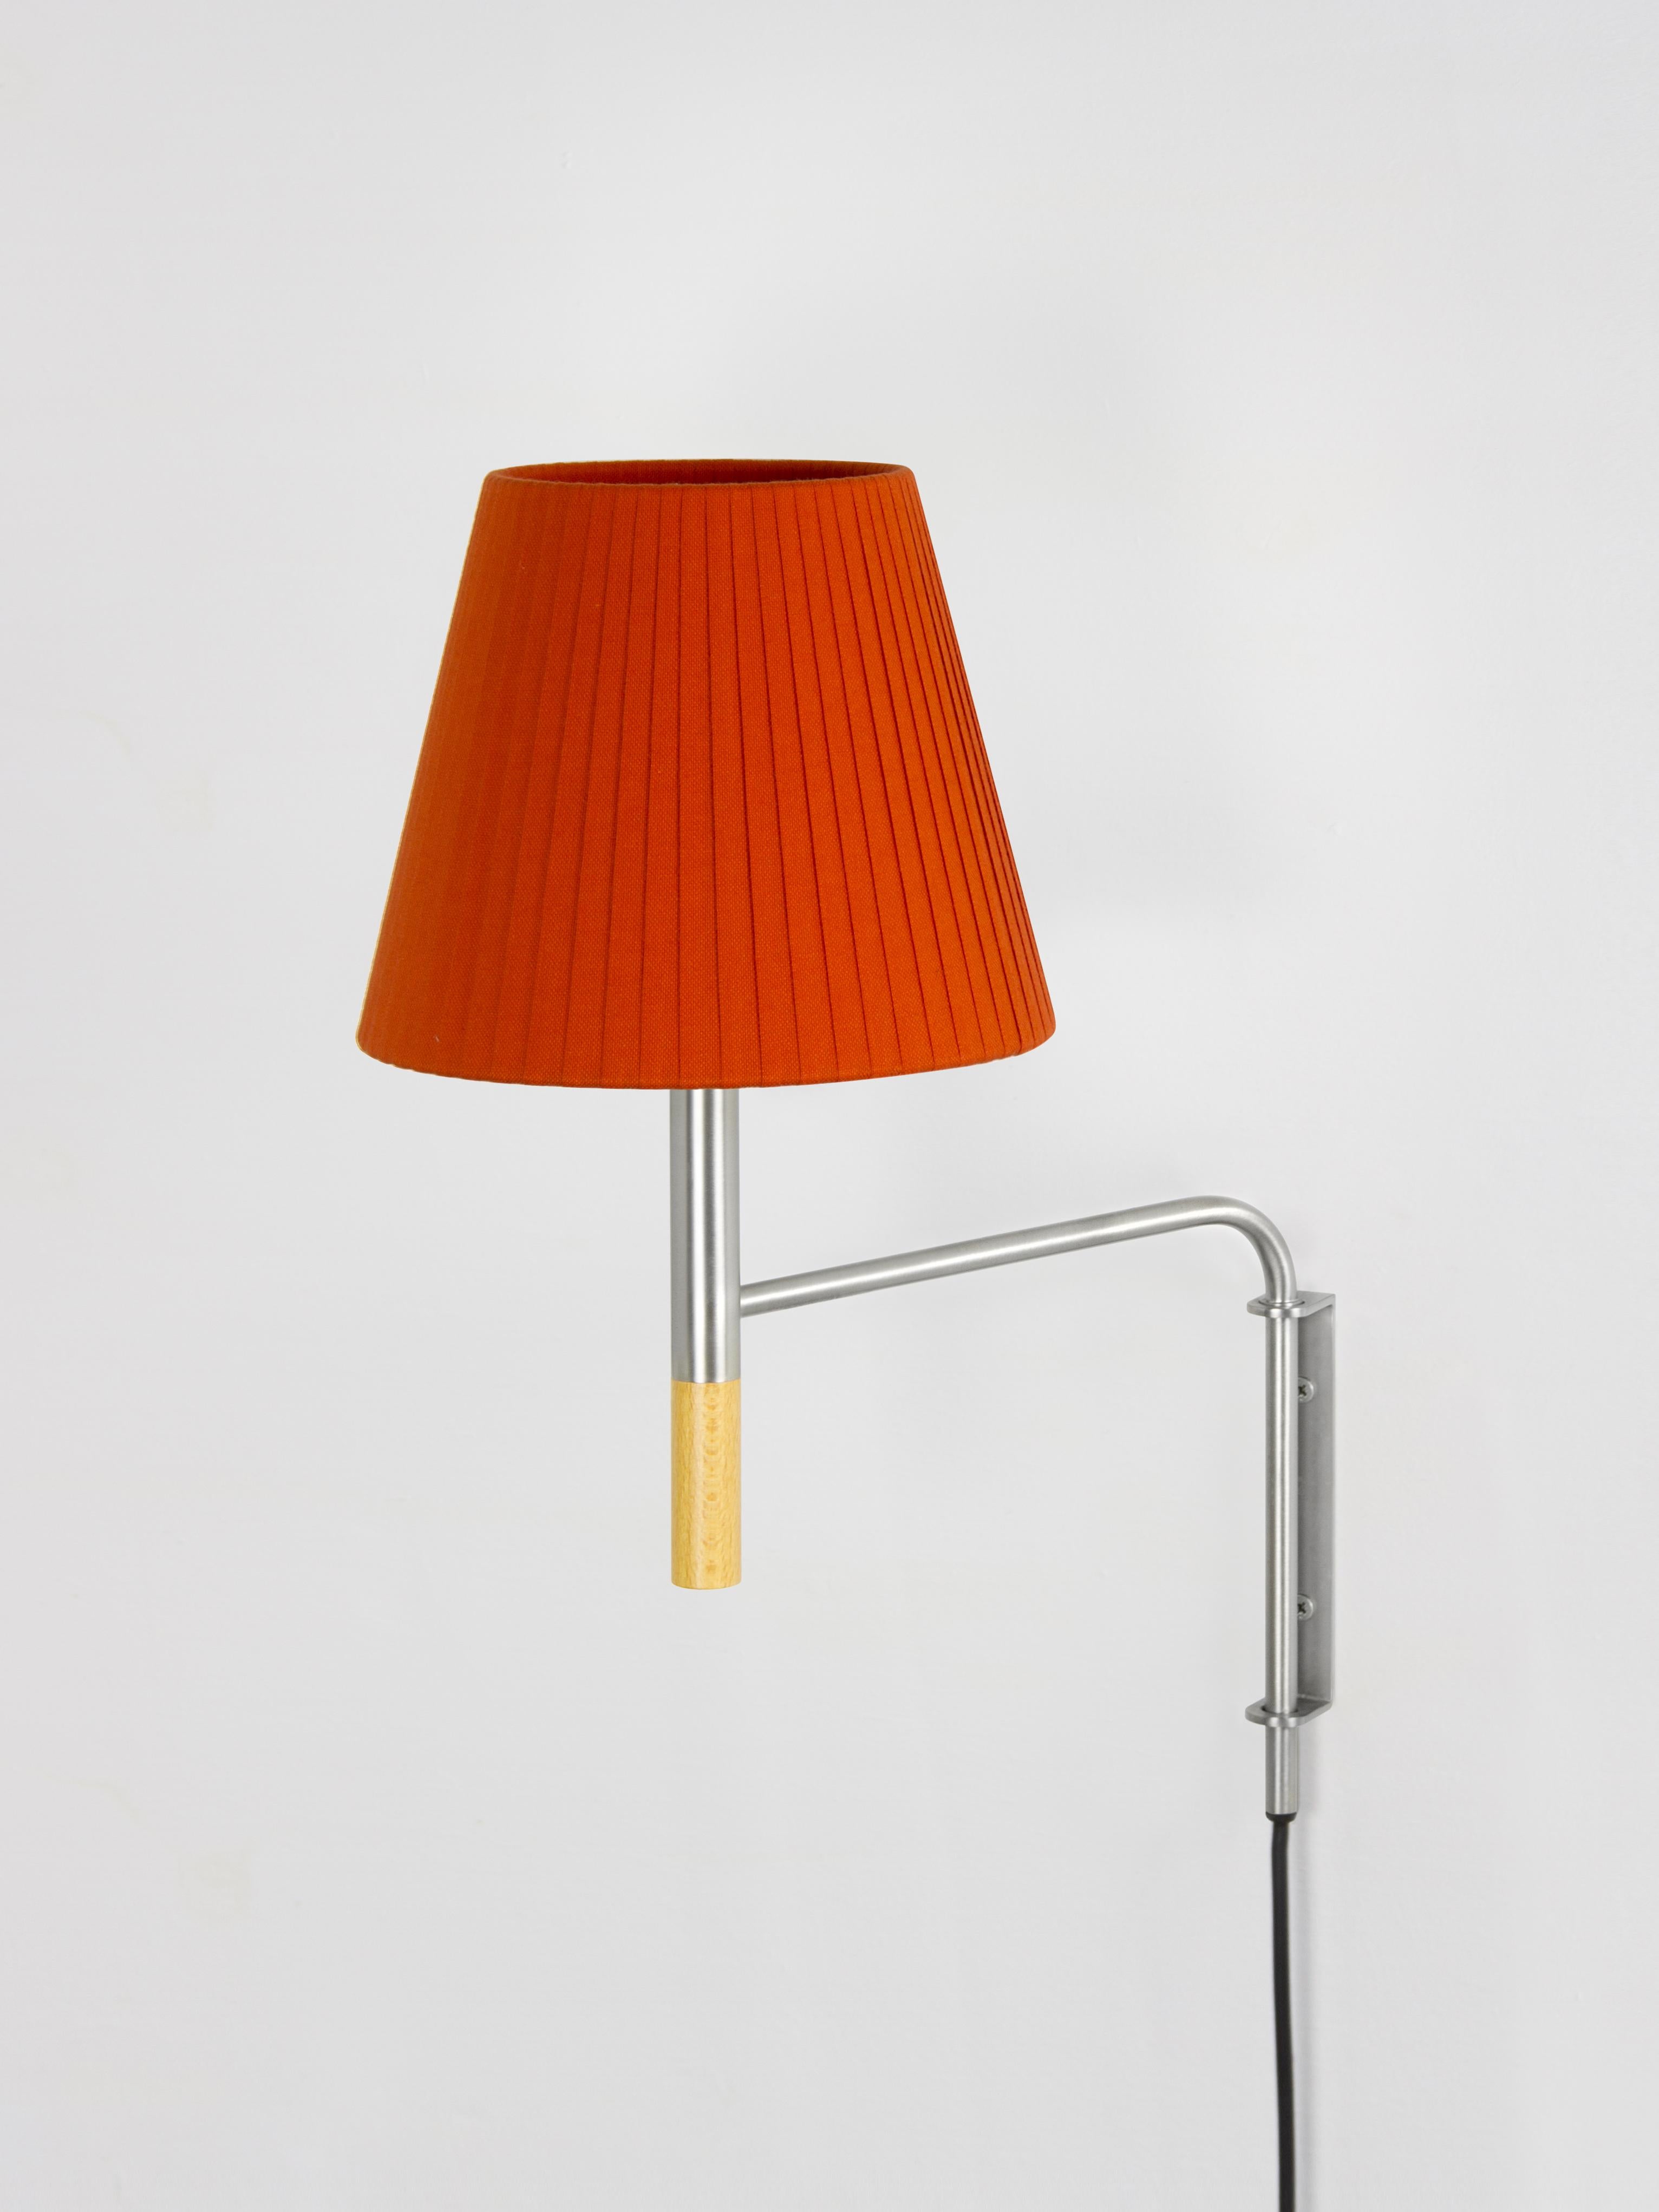 Red BC1 wall lamp by Santa & Cole
Dimensions: D 20 x W 35 x H 44 cm
Materials: Metal, beech wood, ribbon.
Available in other colors.

The BC1, BC2 and BC3 wall lamps are the epitome of sturdy construction, aesthetic sobriety and functional